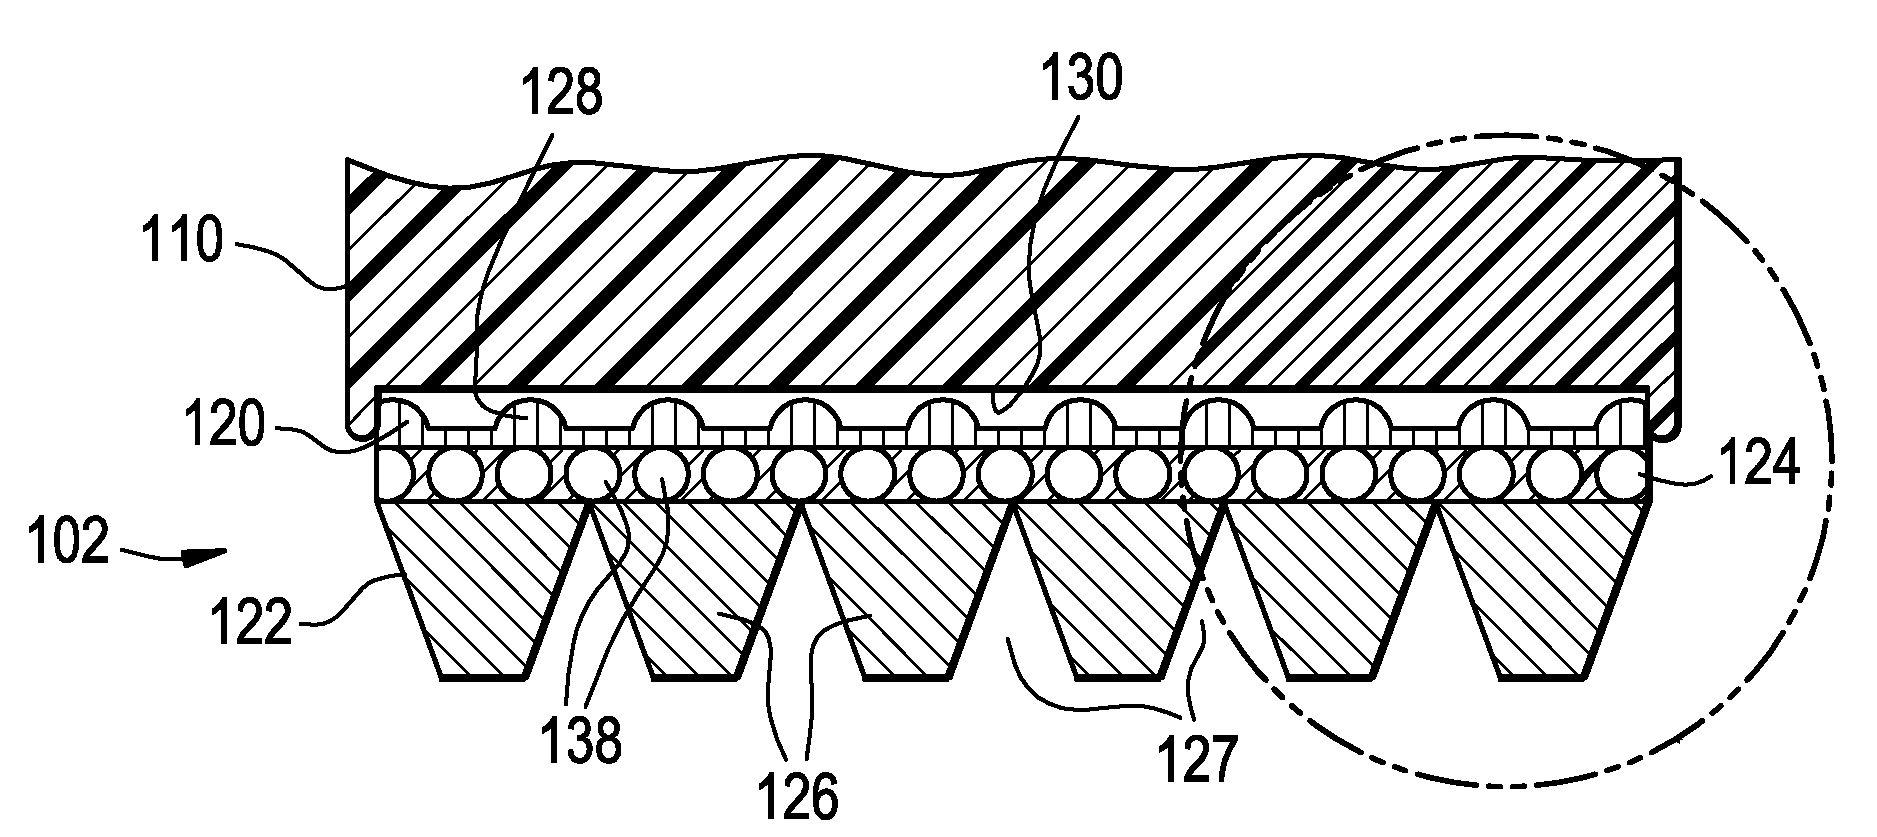 V-ribbed belt having an outer surface with improved coefficient of friction